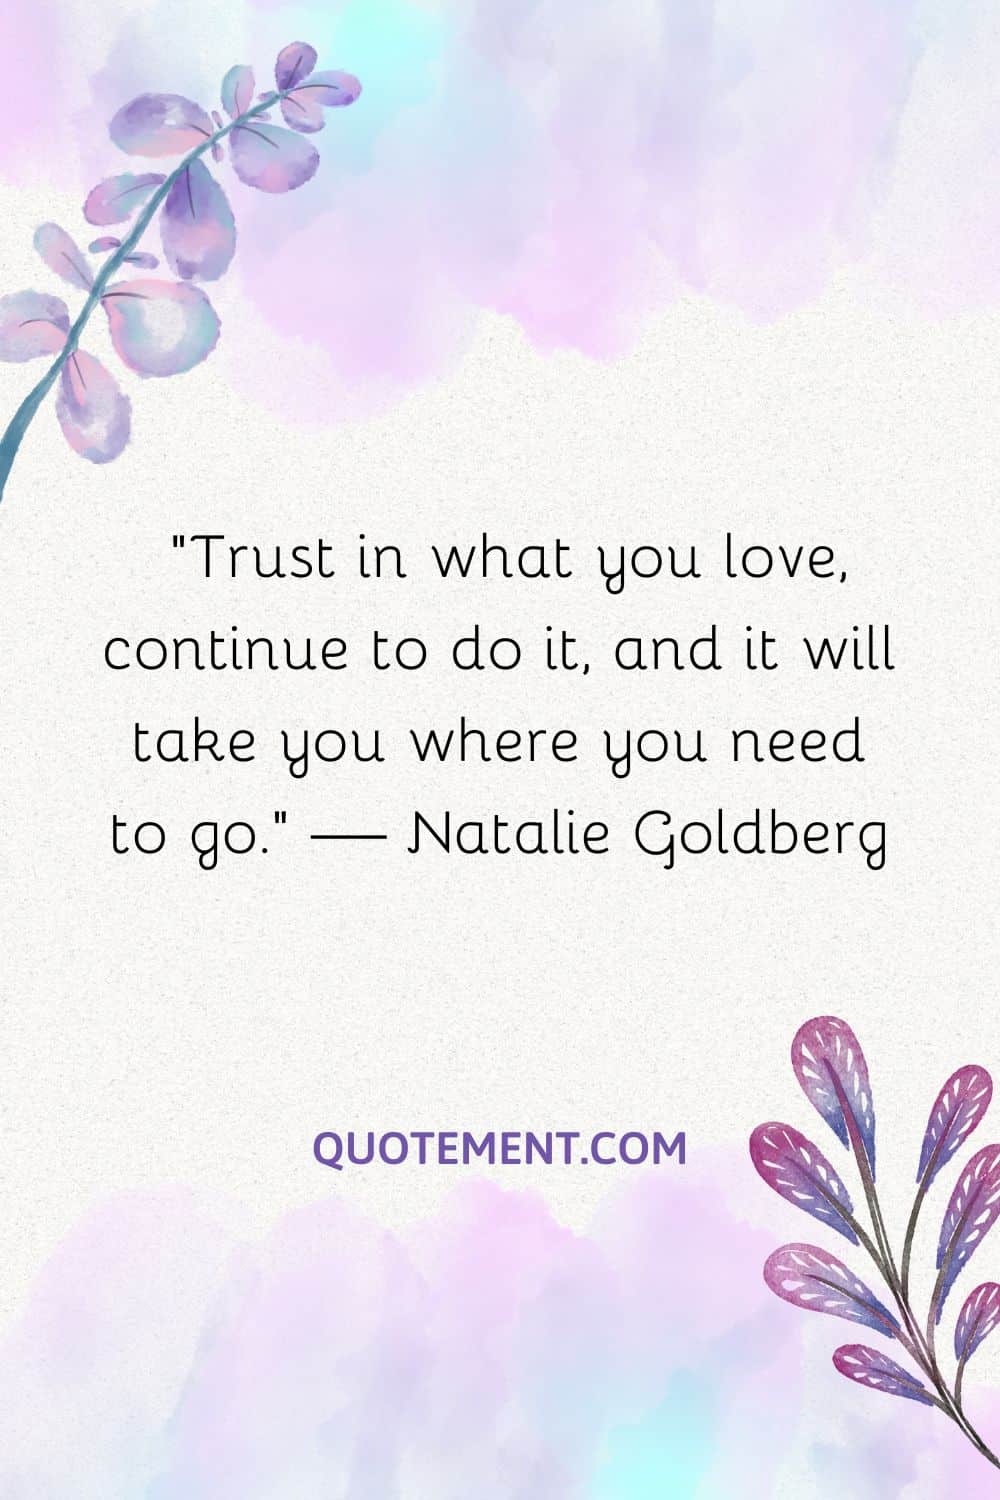 Trust in what you love, continue to do it, and it will take you where you need to go